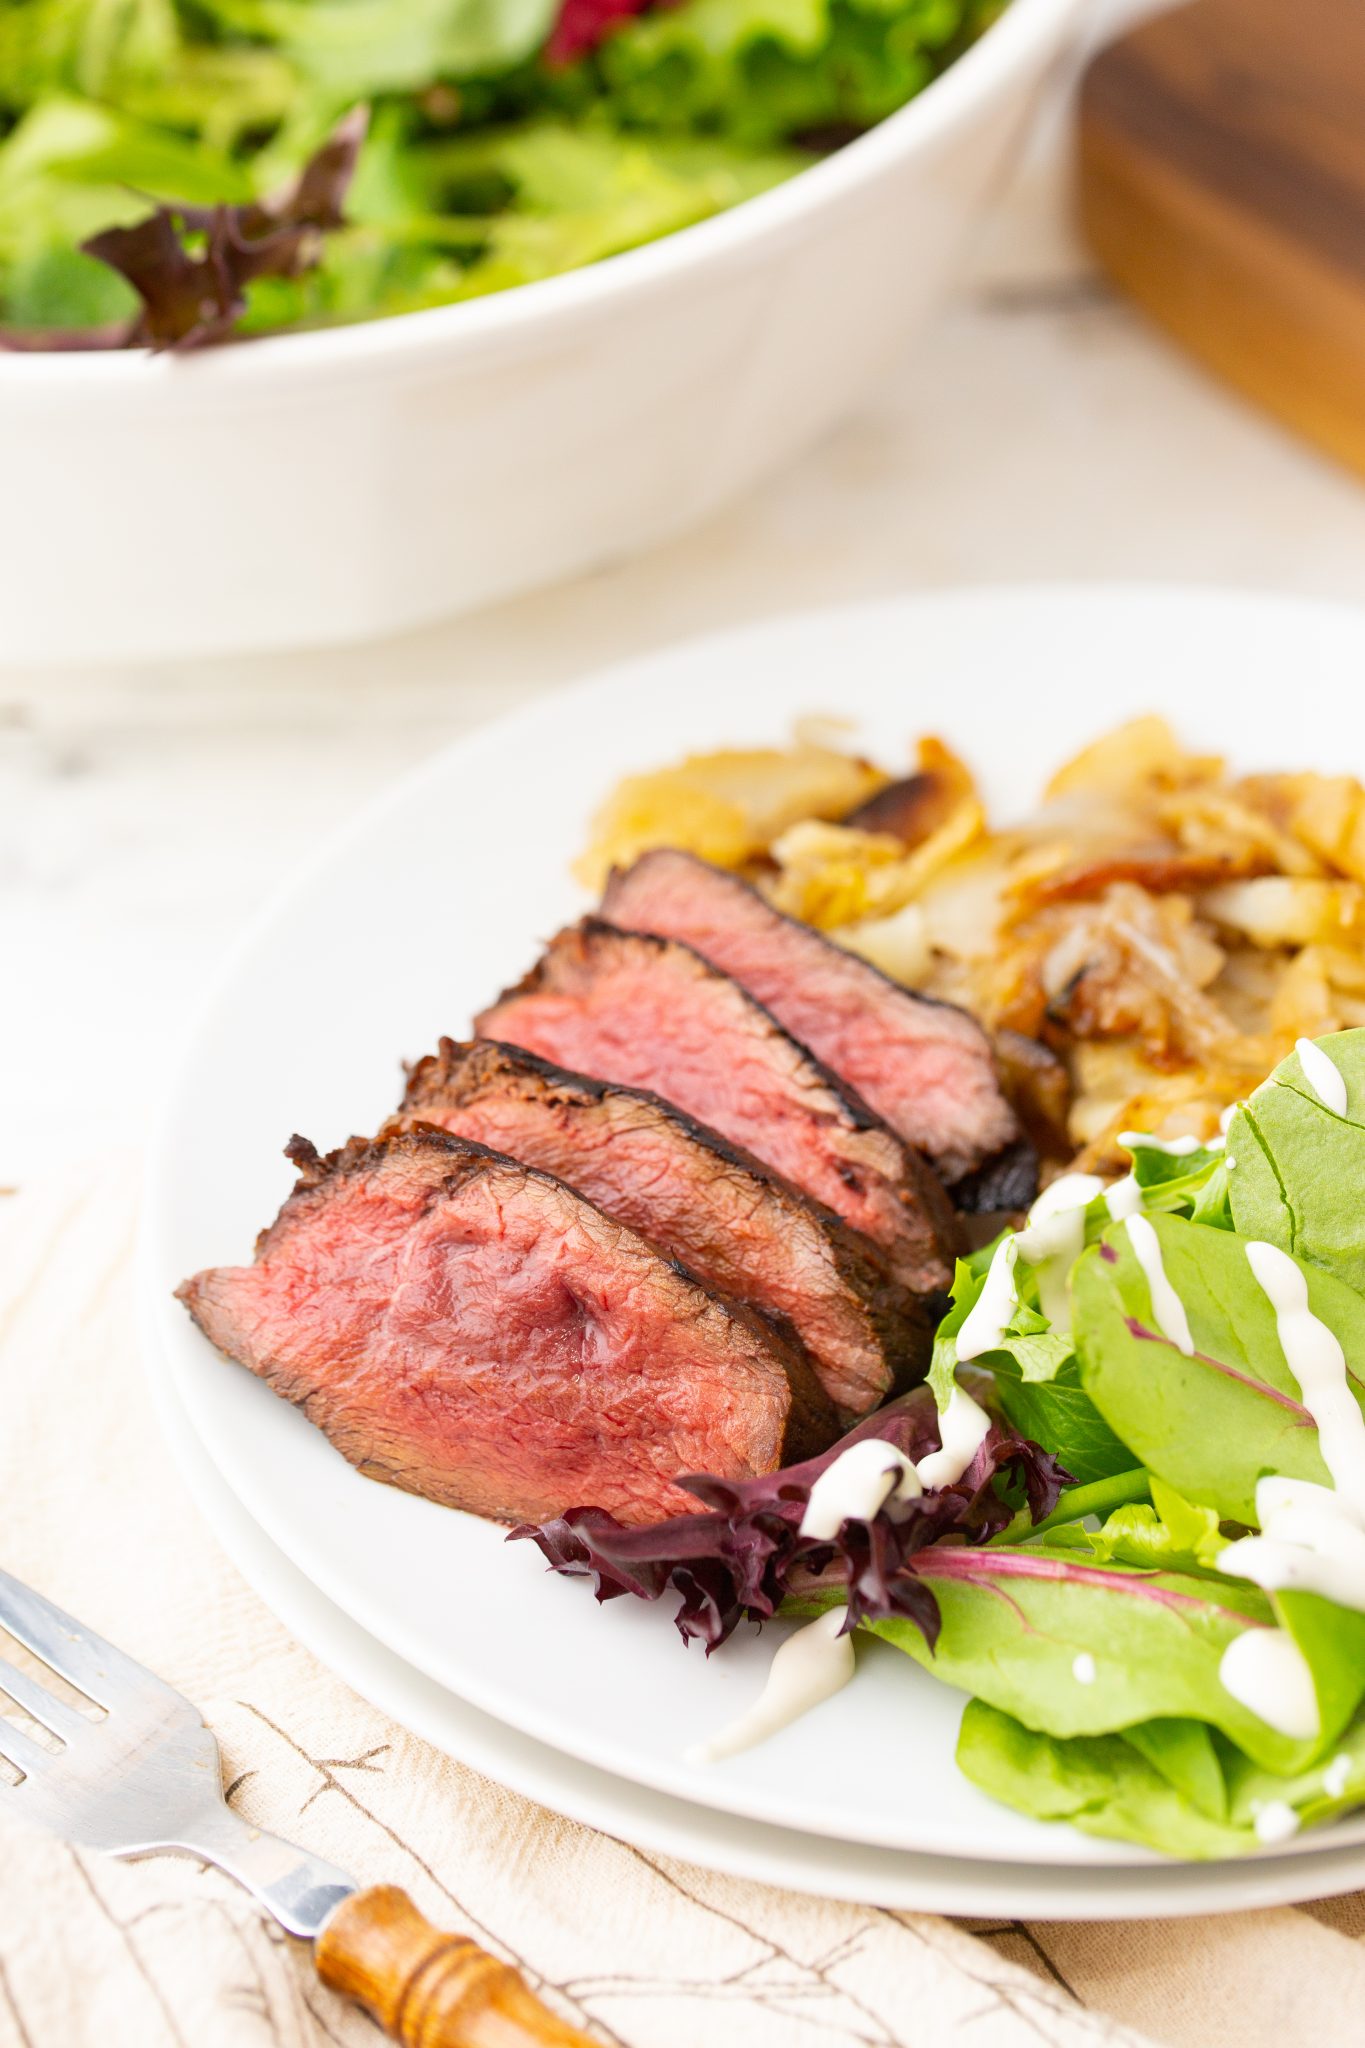 Grilled venison backstrap sliced into medallions served on a plate with potatoes and salad.